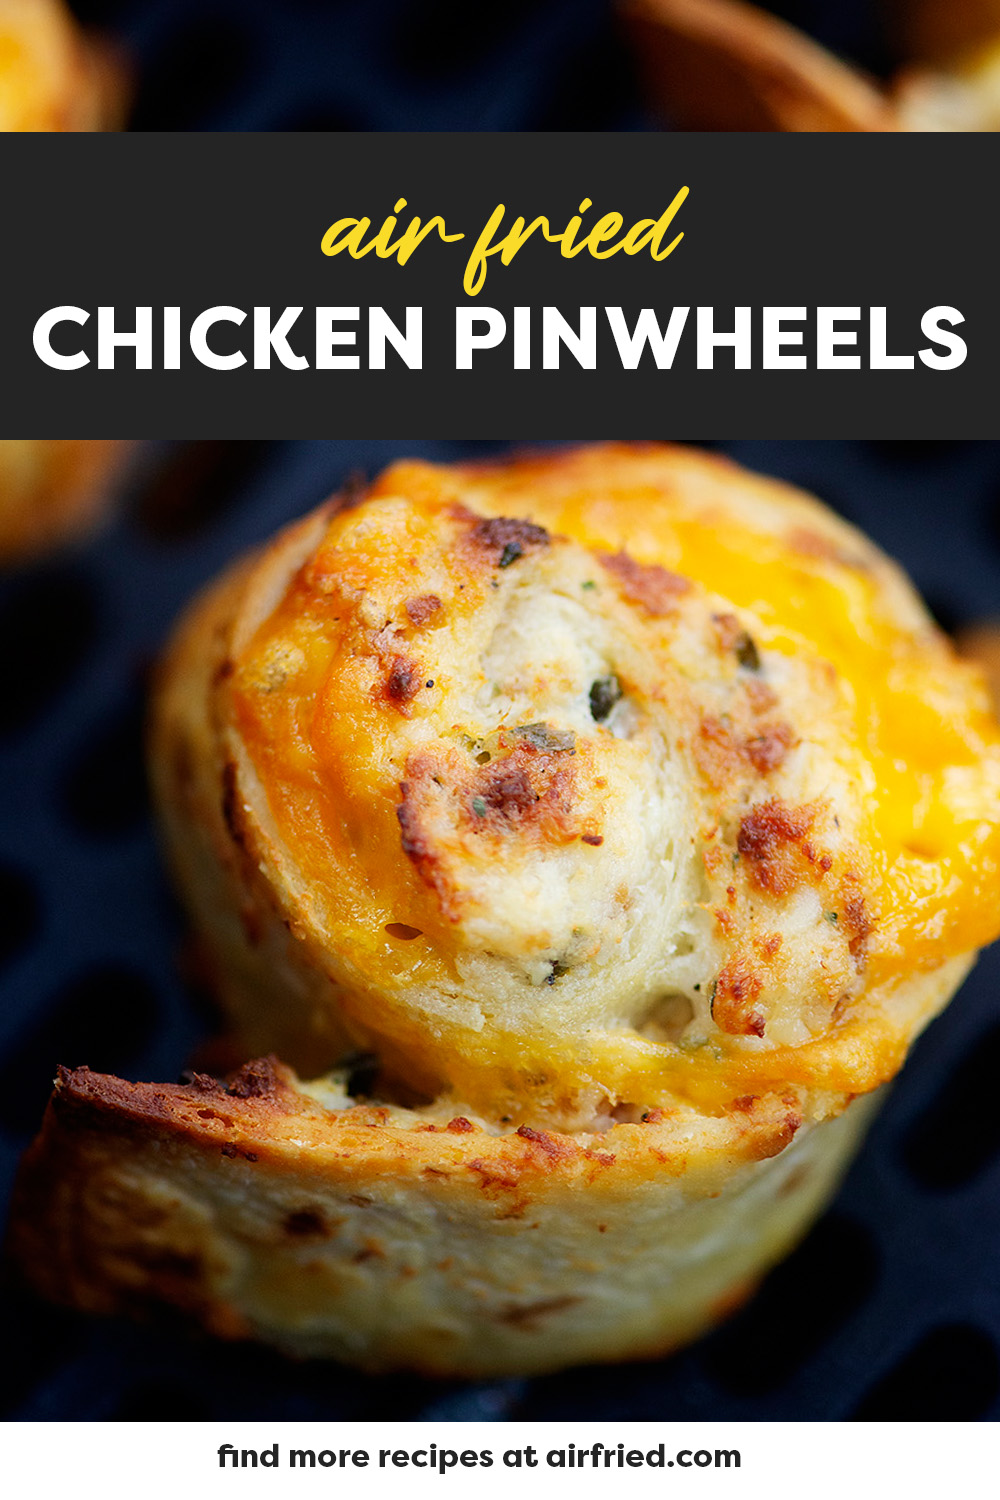 Very close picture of a chicken pinwheel in an air fryer basket.